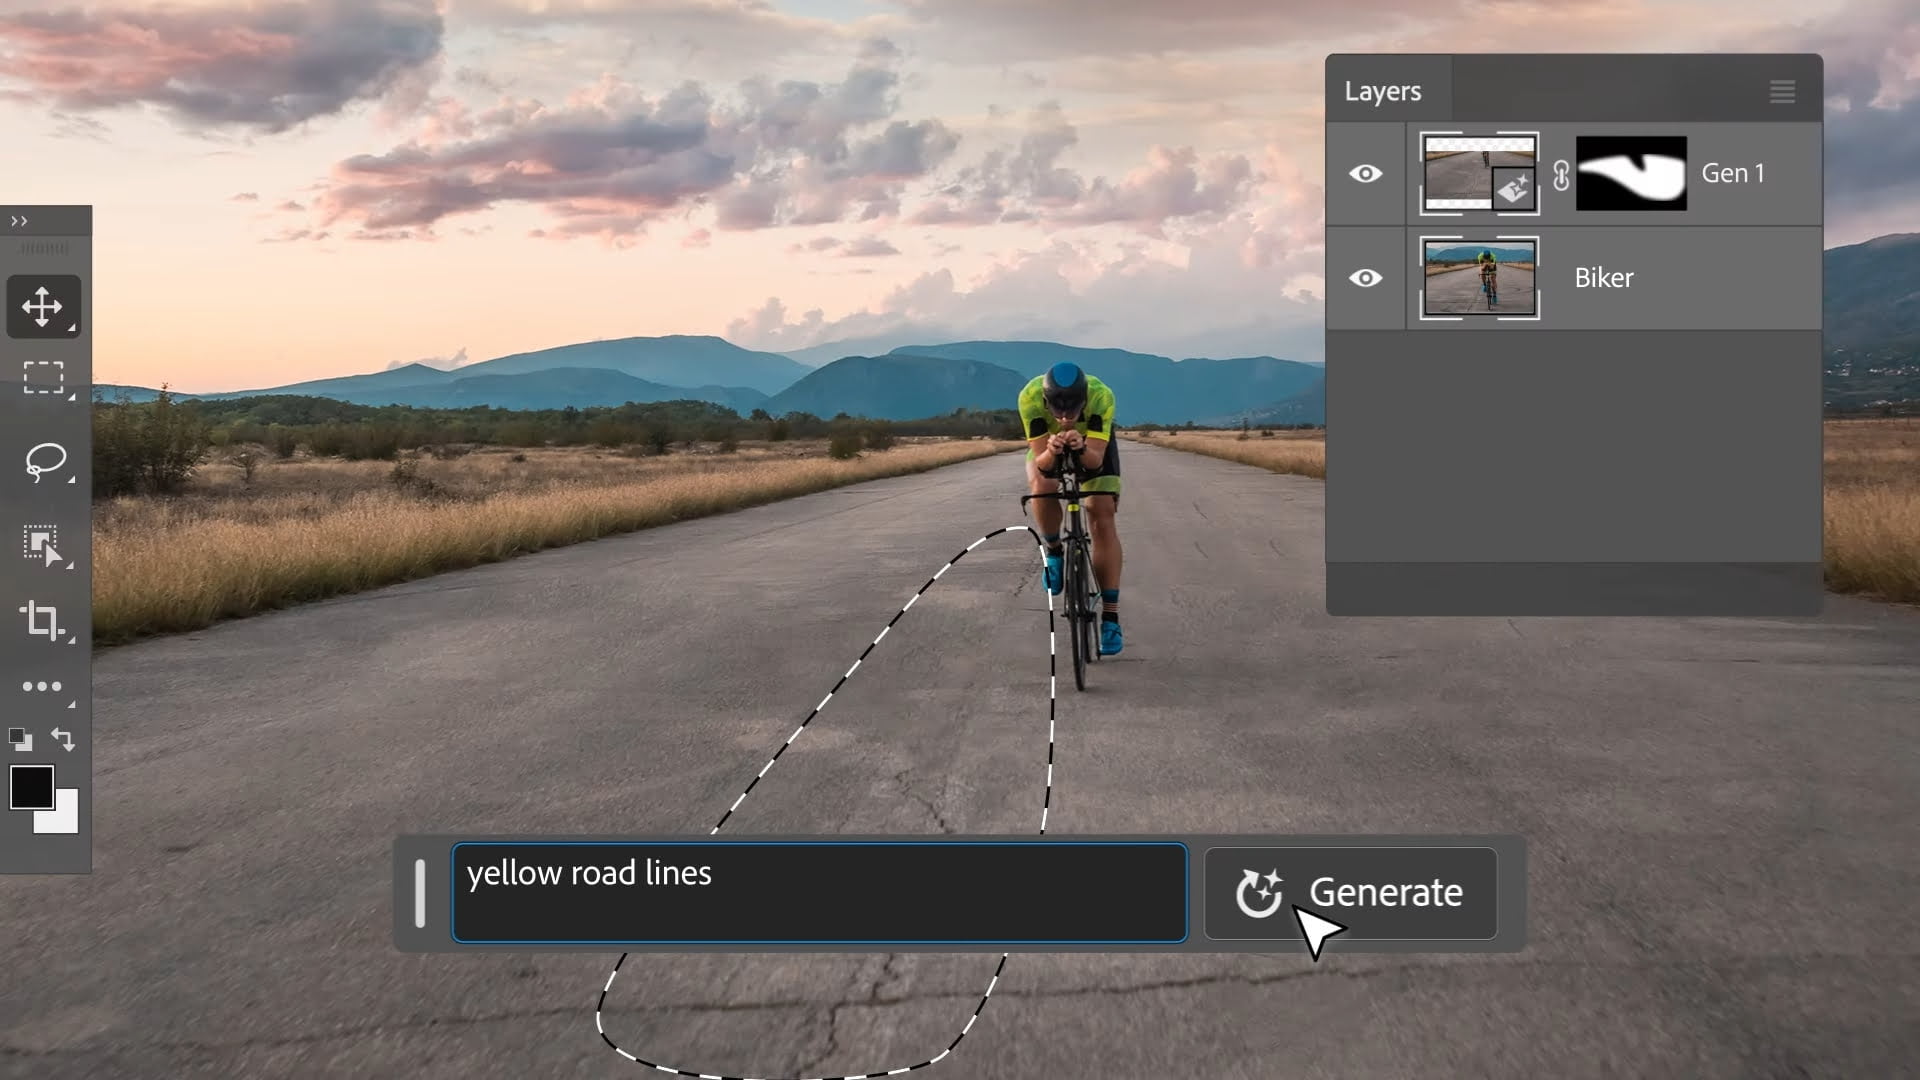 Adobe Photoshop can now modify images with simple text prompts